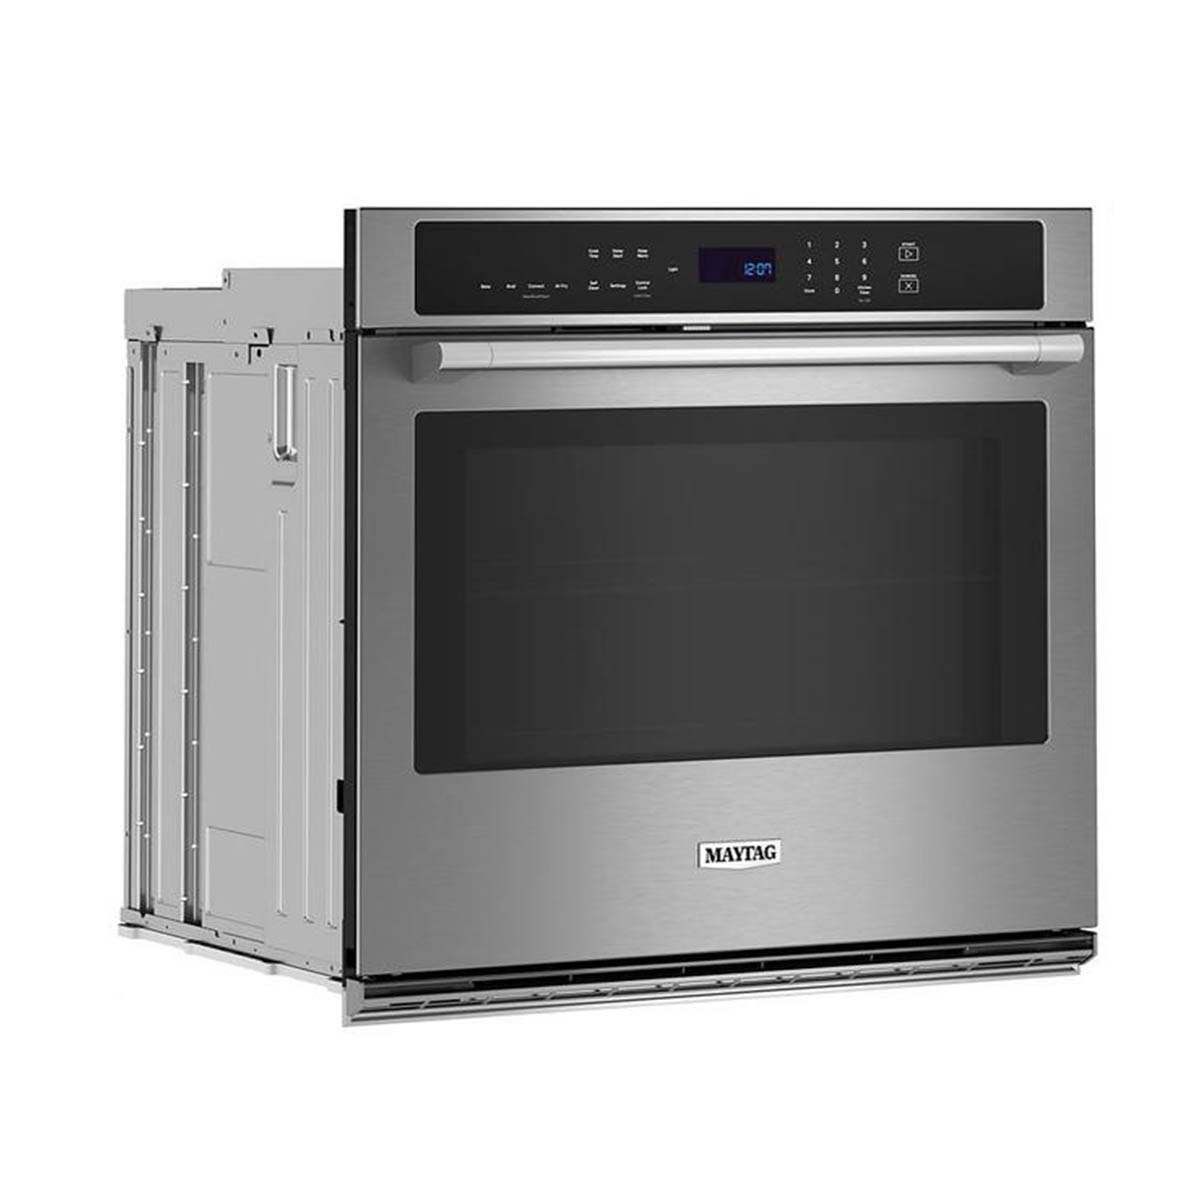 How To Fix The Error Code F9-E1 For Maytag Oven